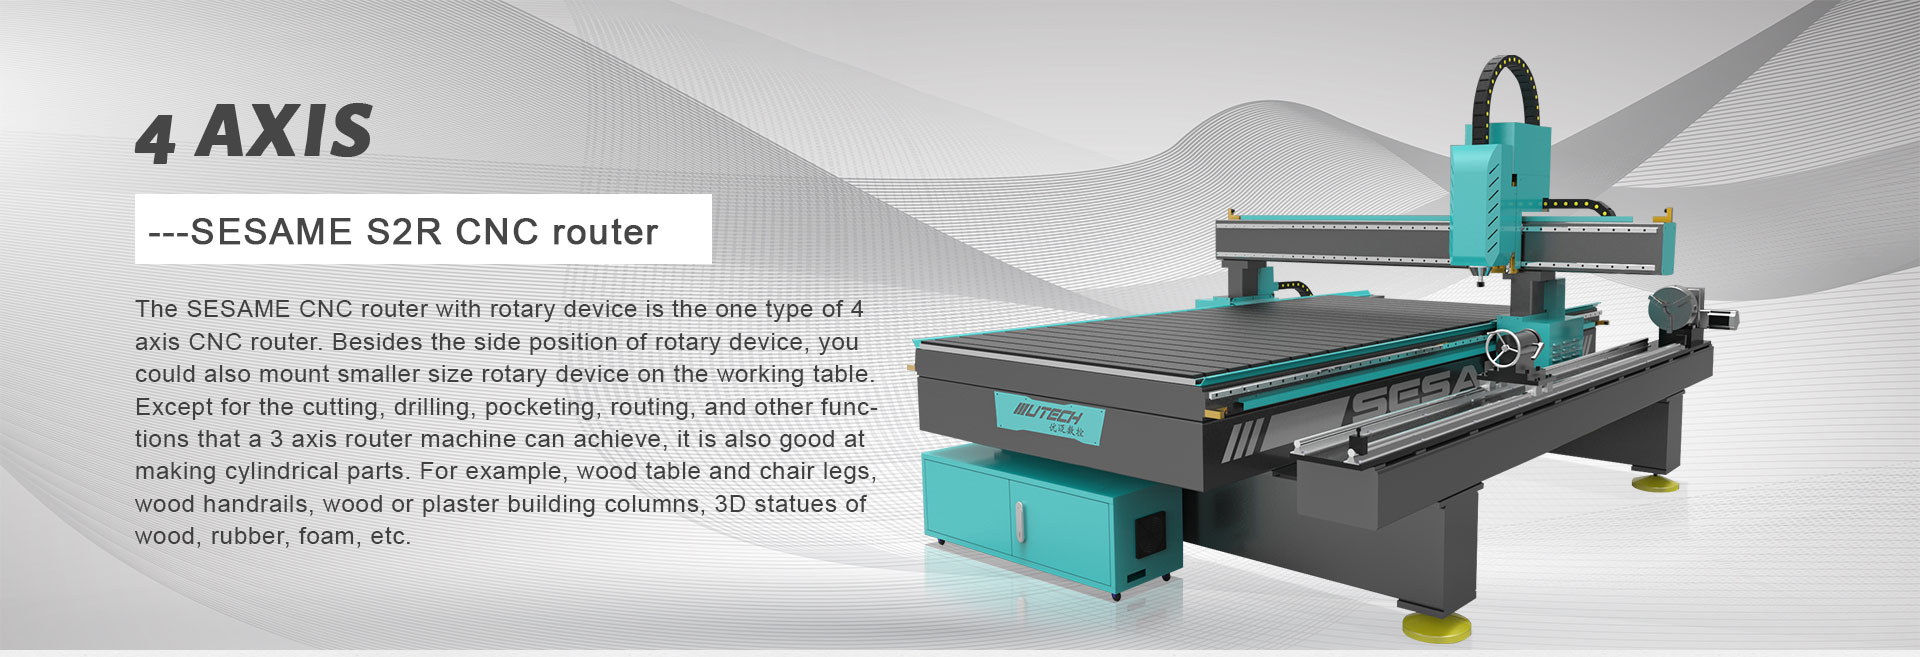 4TH AXIS CNC ROUTER